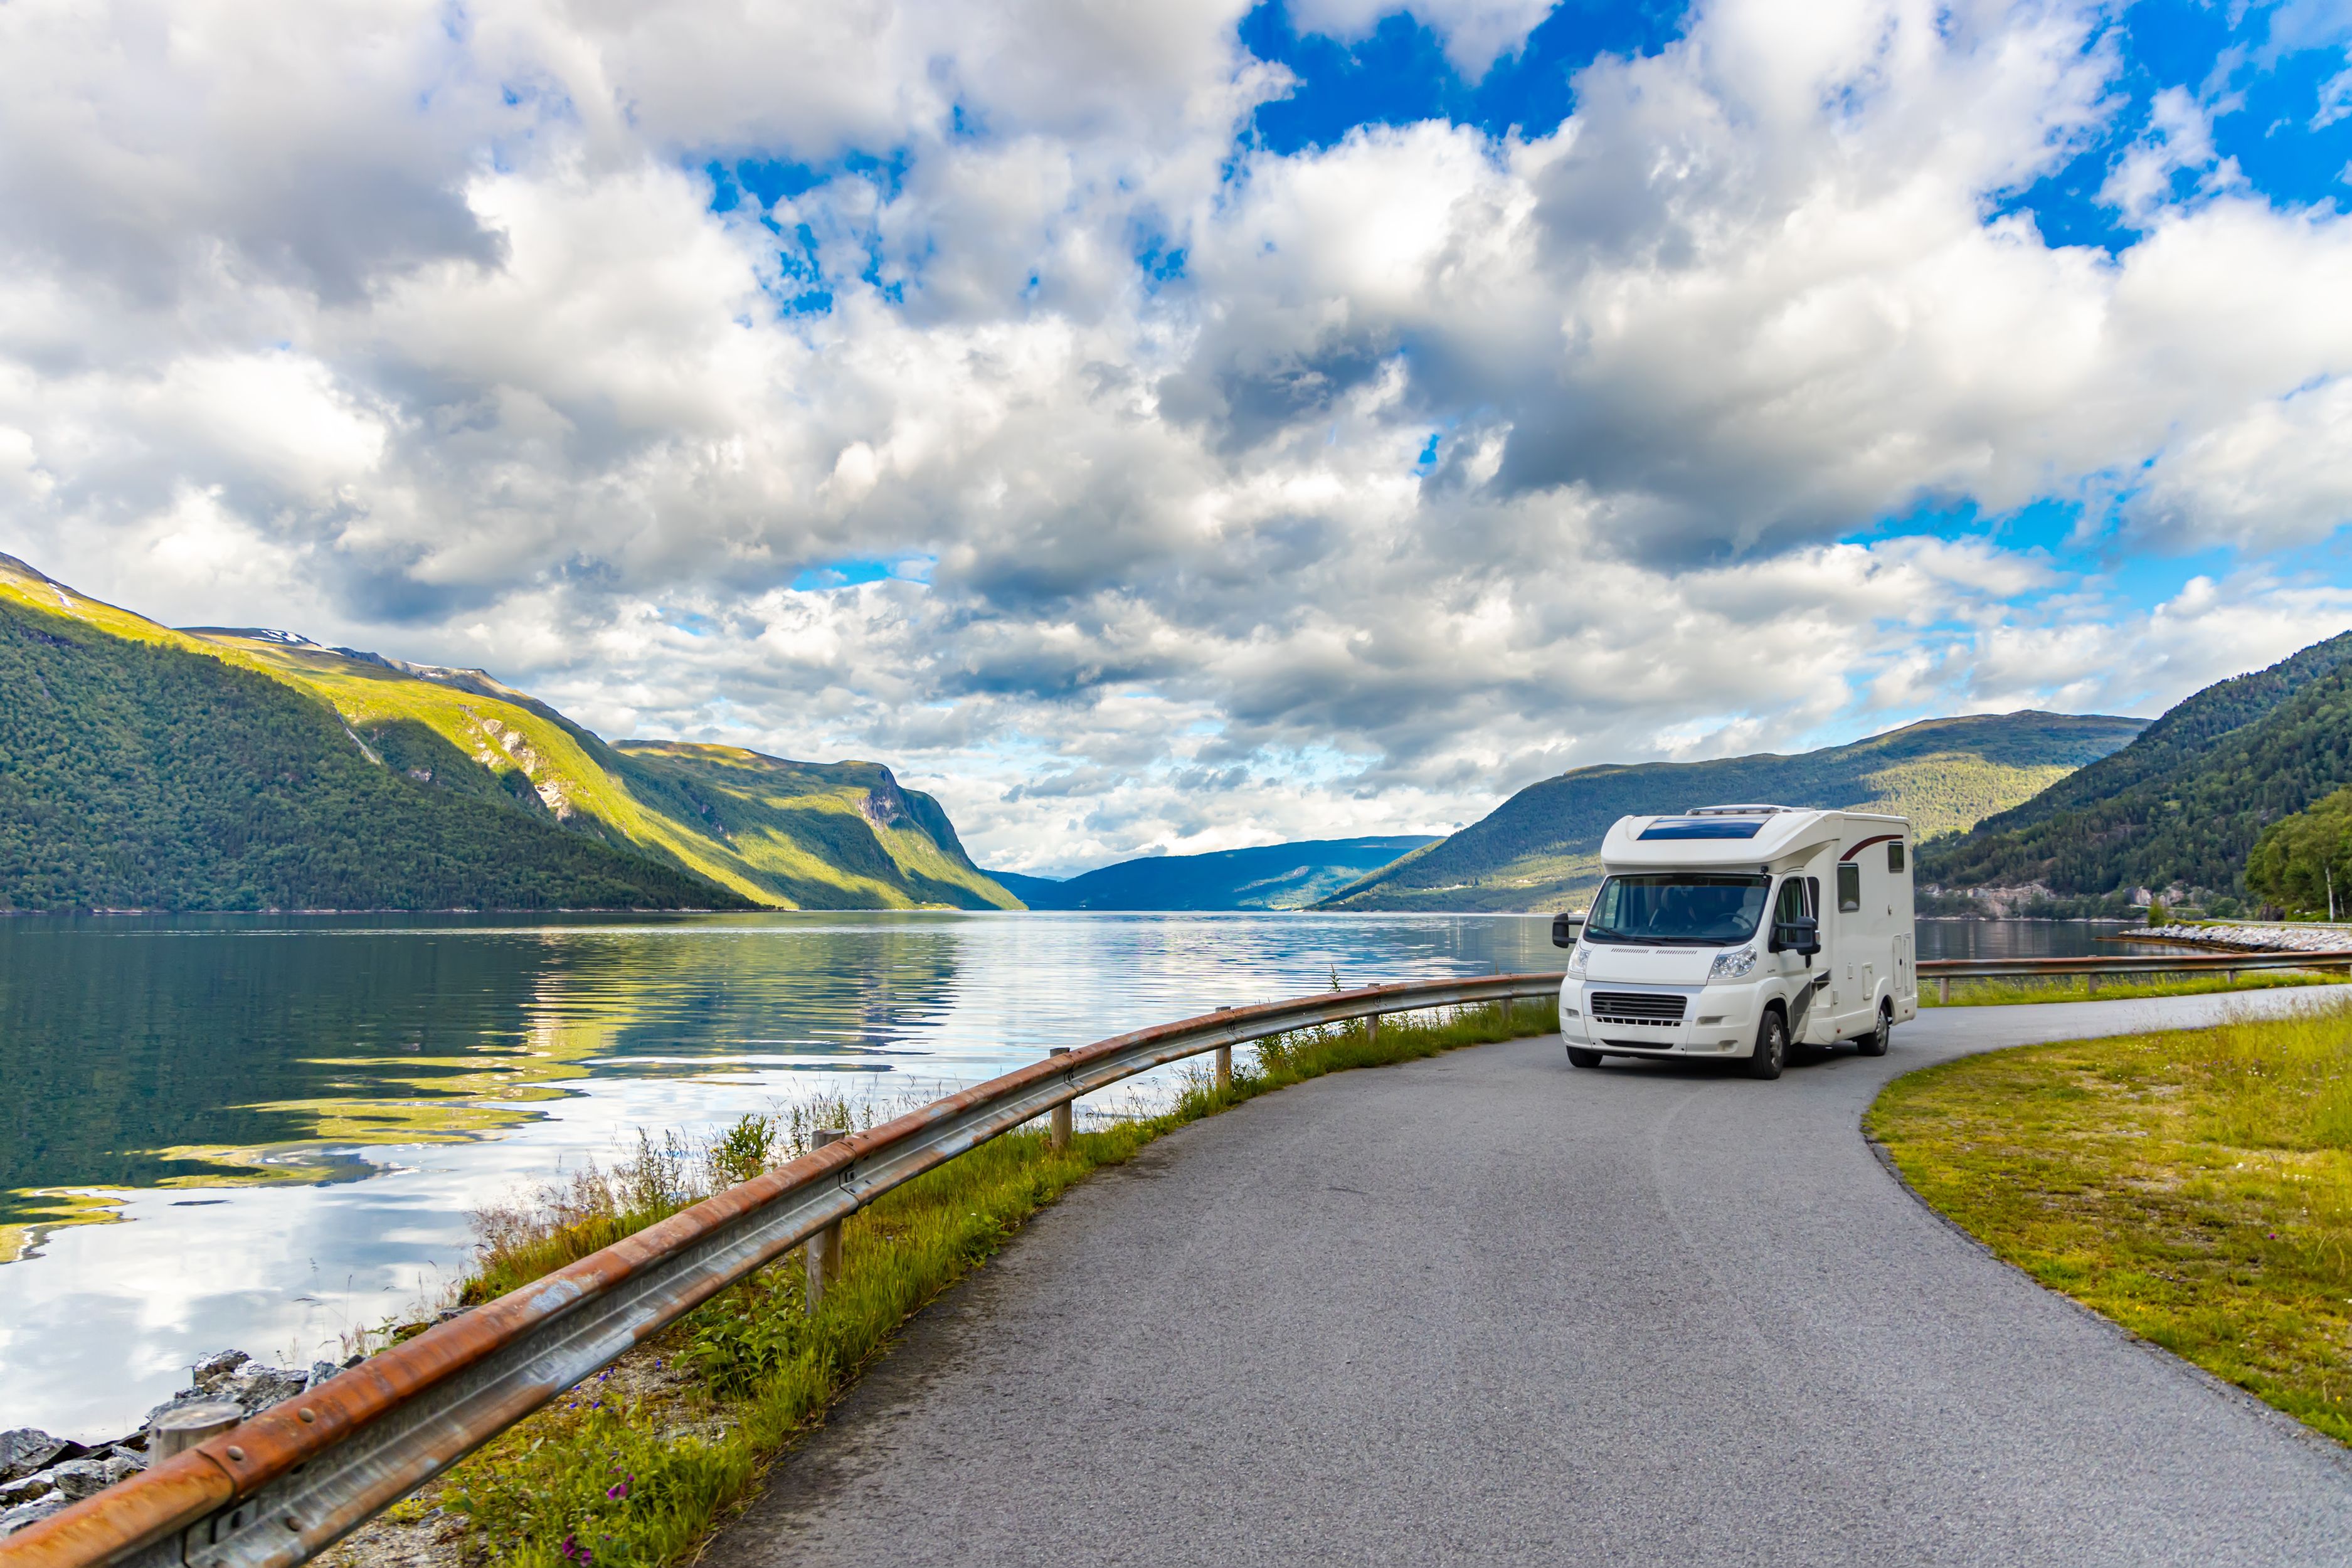 FREE ACCESS TO THE CARAVAN, MOTORHOME & HOLIDAY SHOW